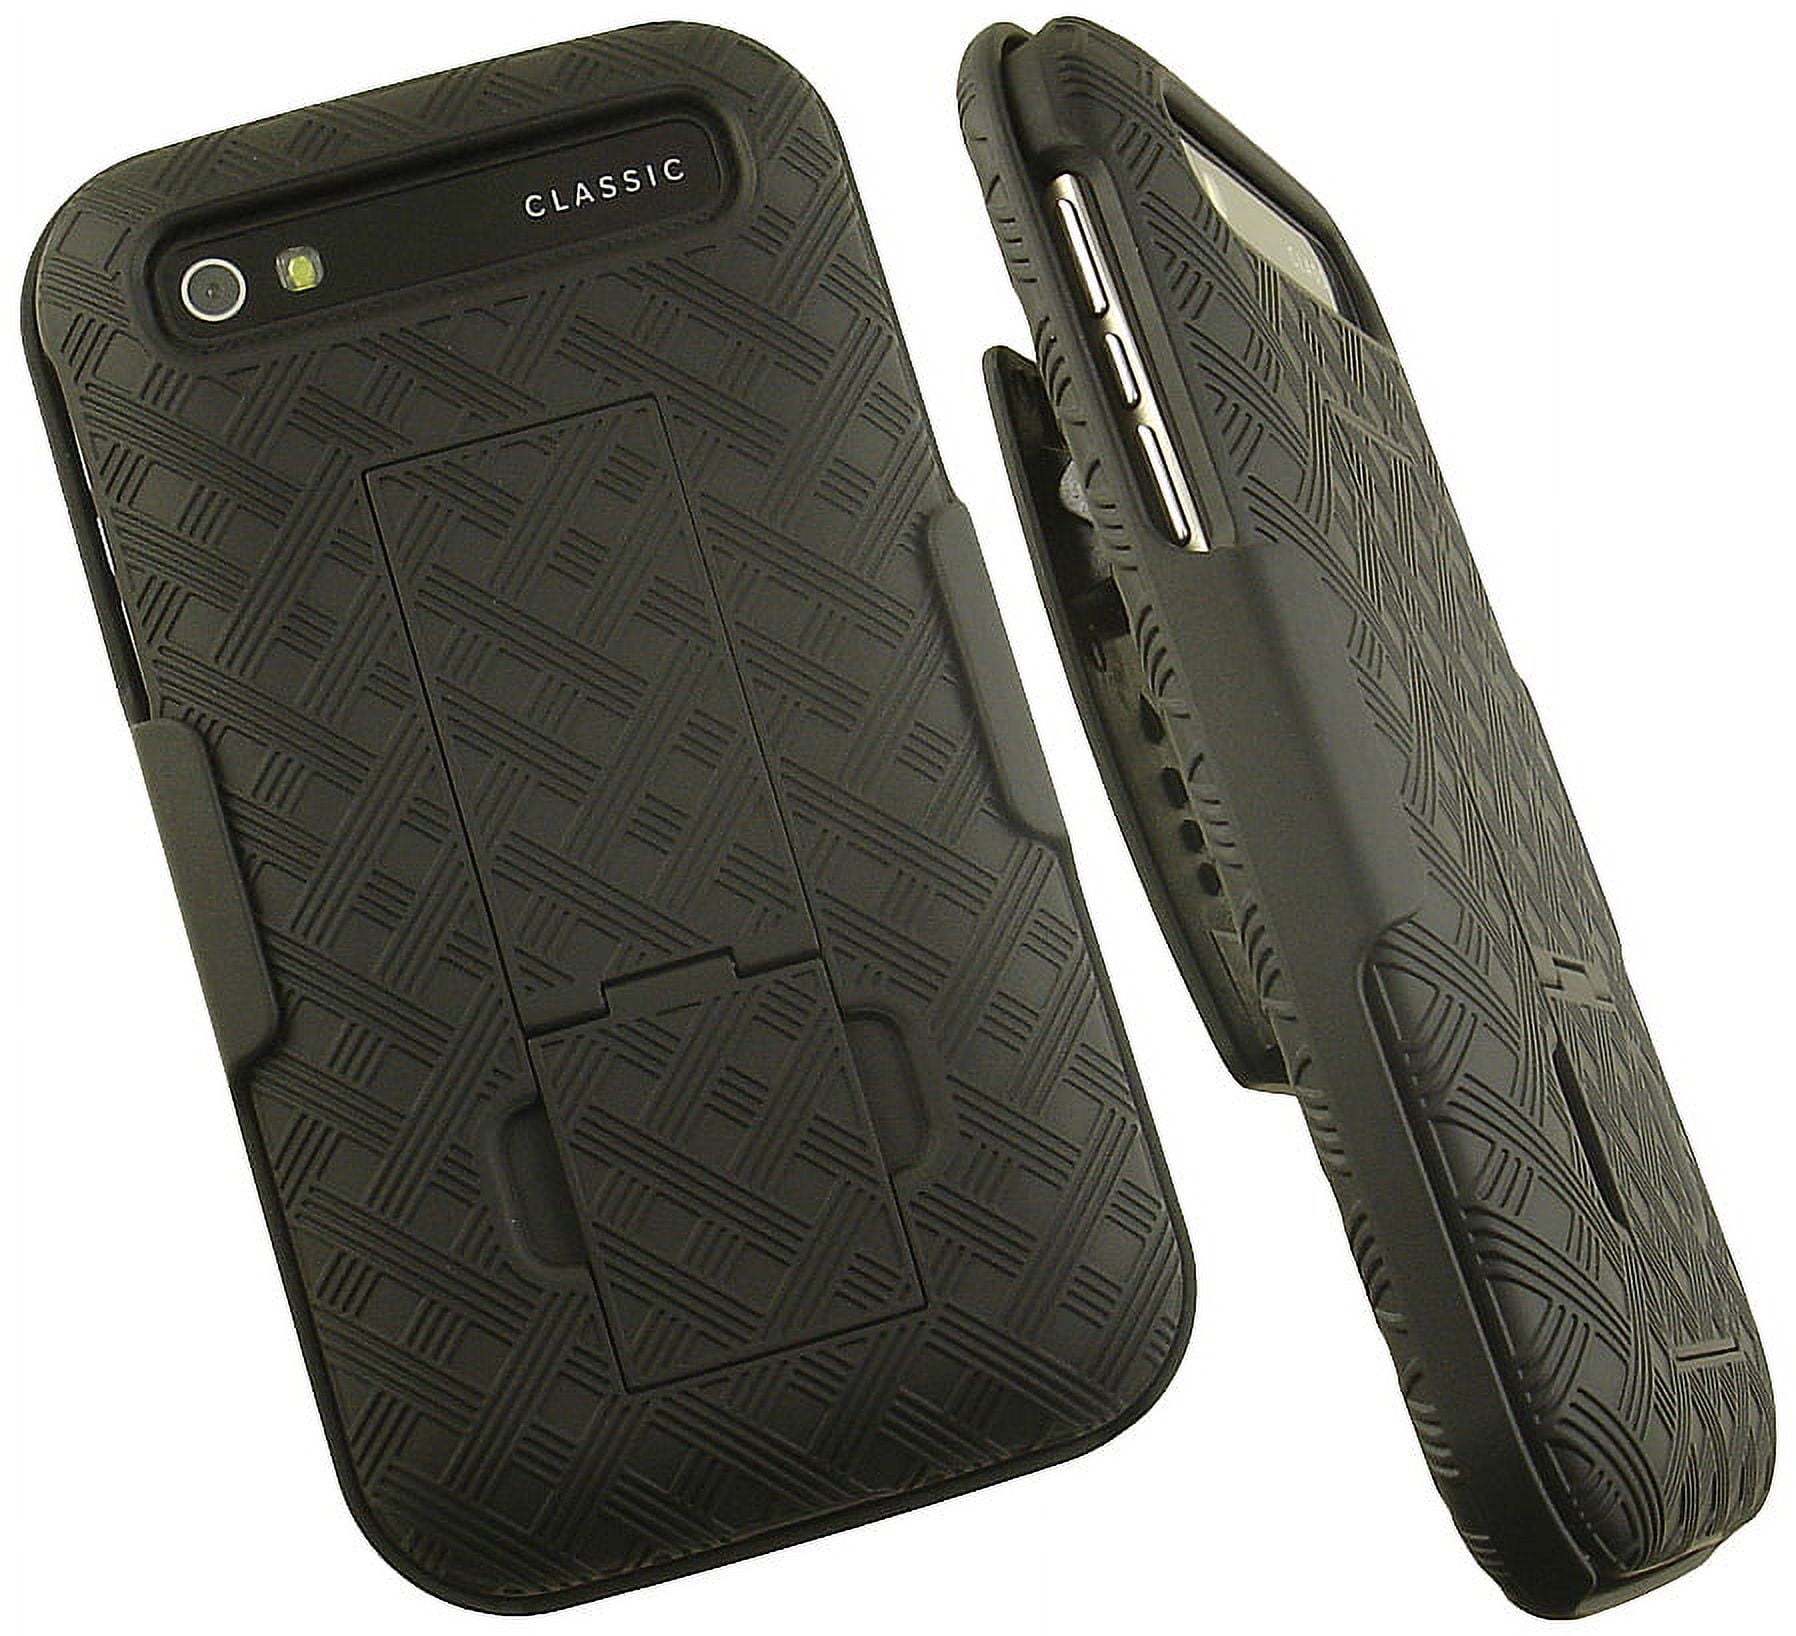 Case with Clip for BlackBerry Classic, Nakedcellphone Black